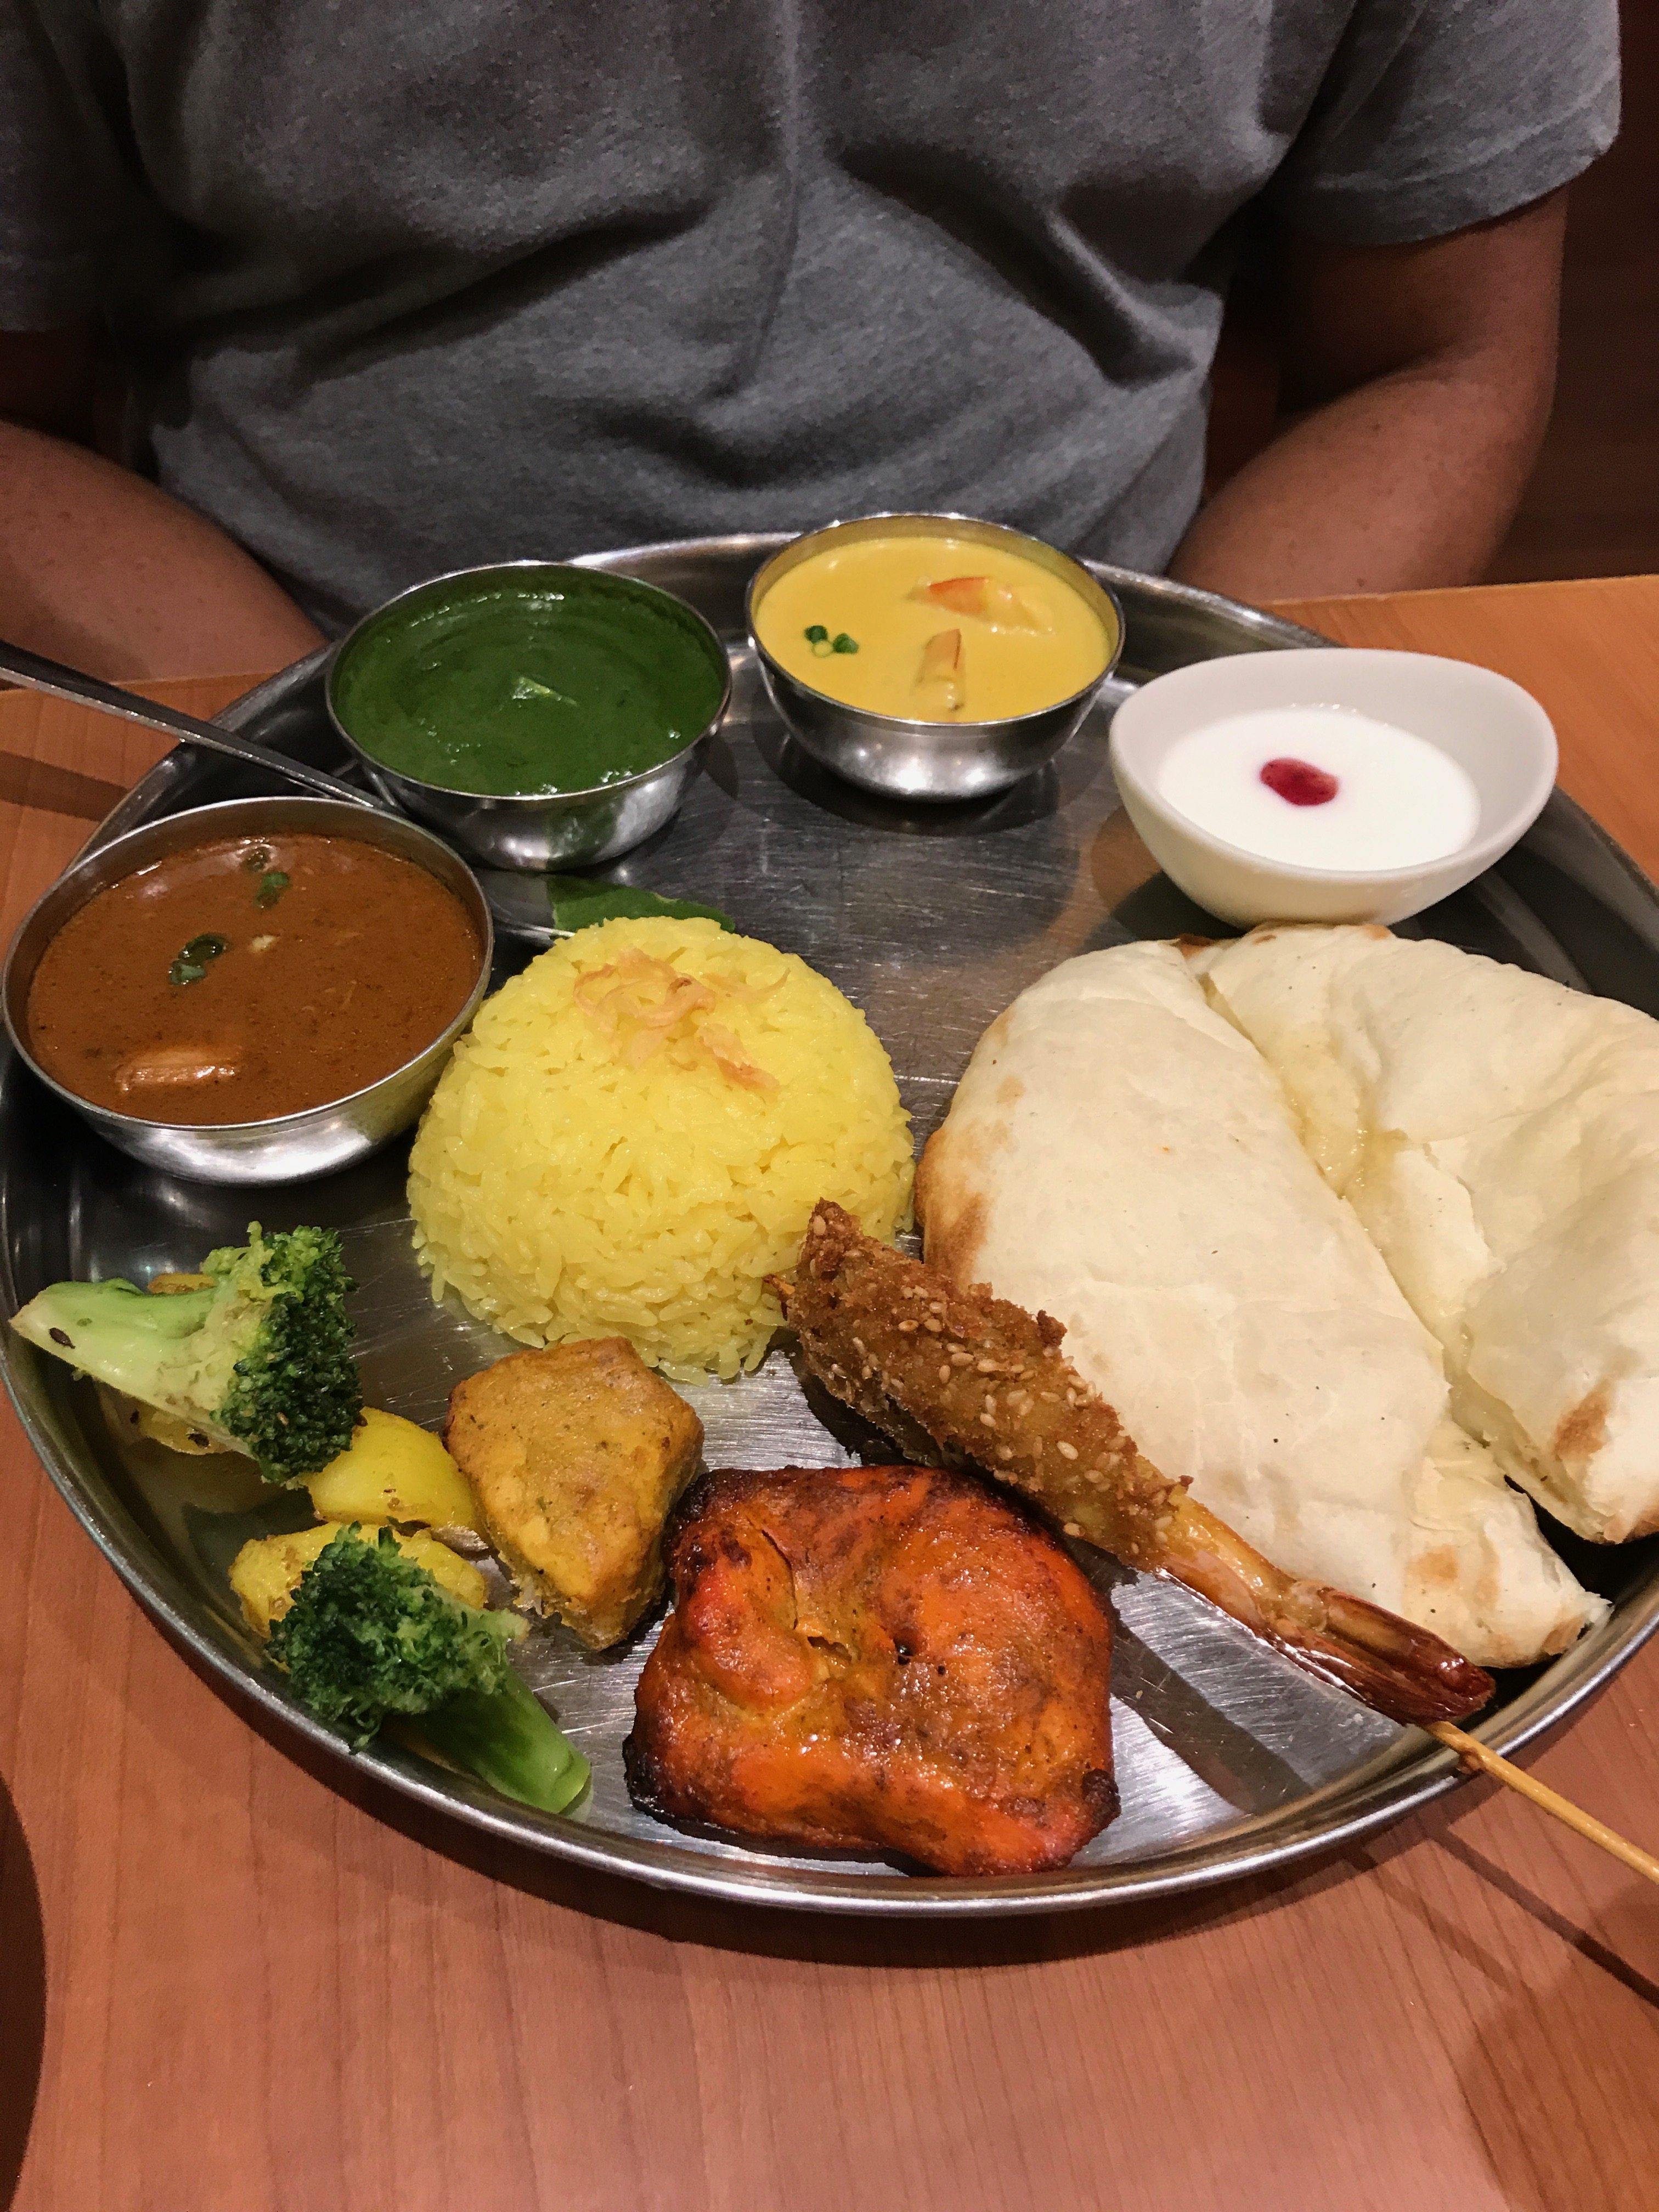 Eating Food In Japan - Trying Different Food In Japan - Tokyo Skytree Indian Restaurant